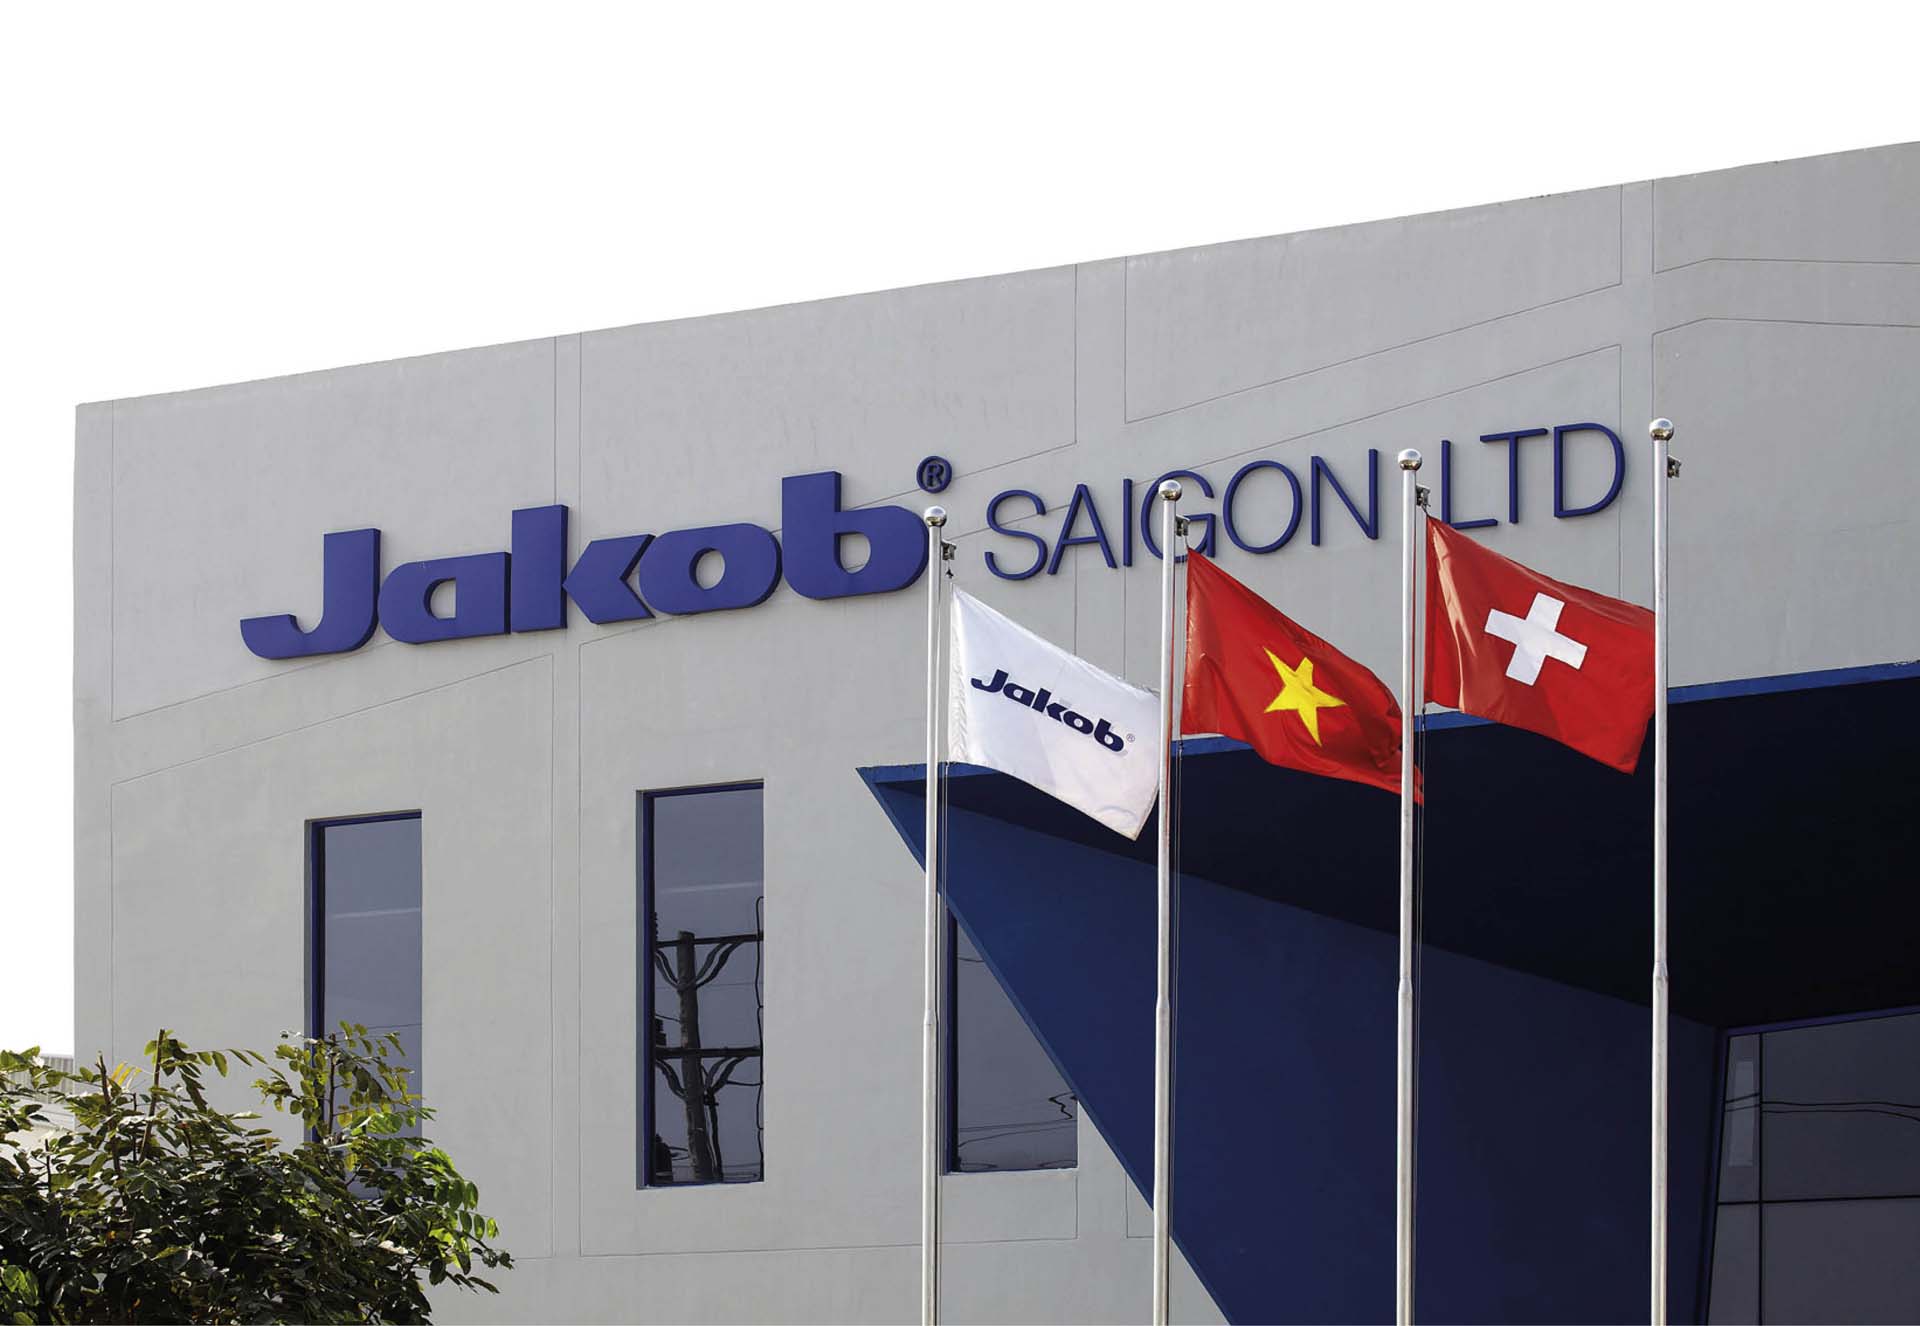 Image of Jakob Saigon factory in 2008 with the flags of Jakob, Vietnam and Switzerland